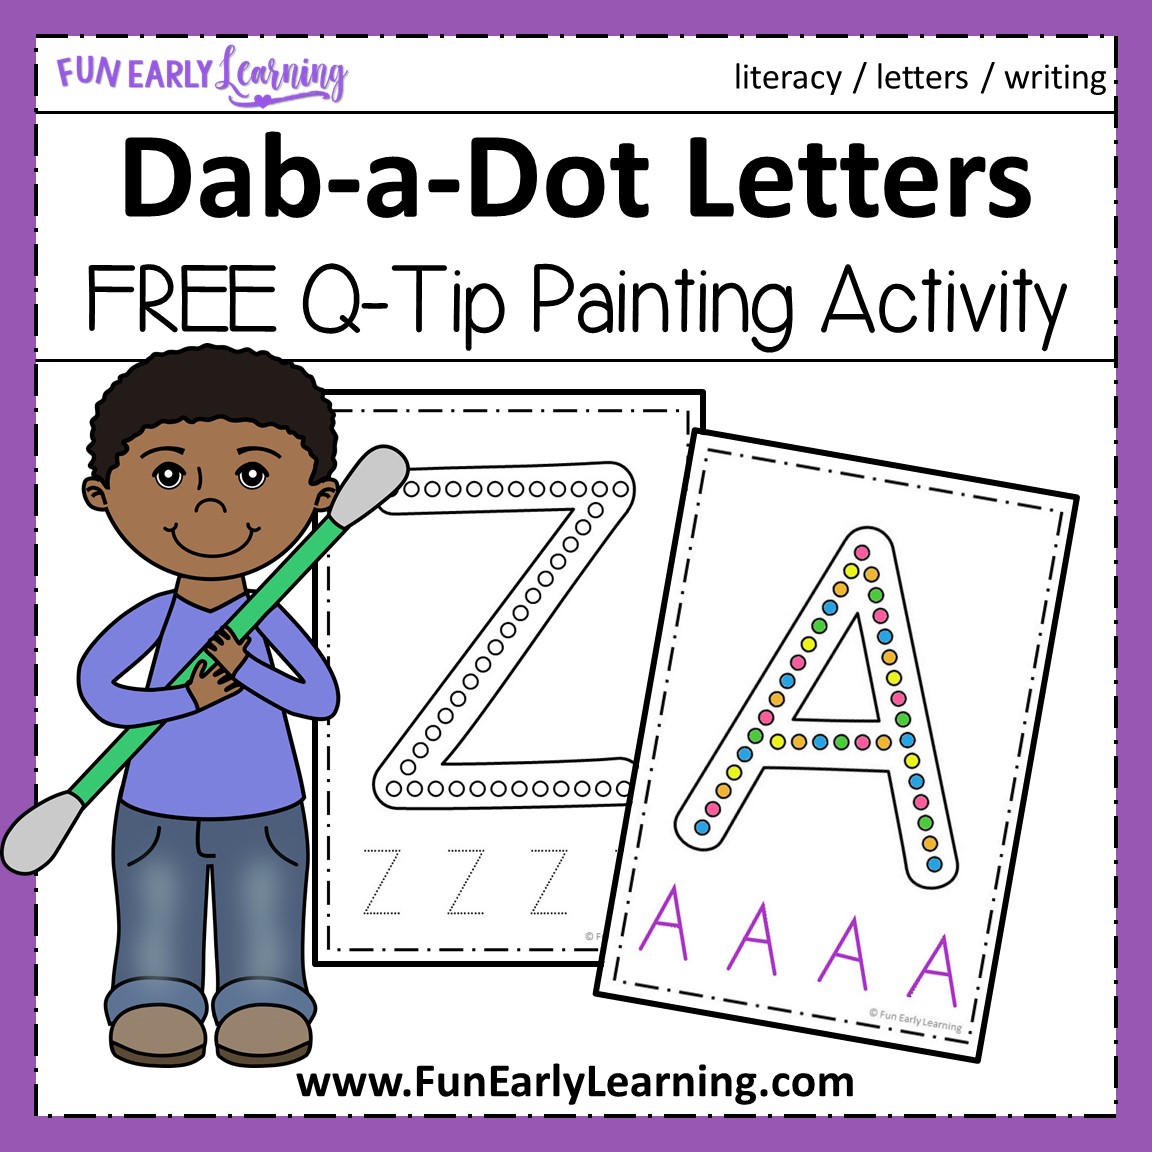 dab-a-dot-letters-q-tip-painting-fun-free-printable-alphabet